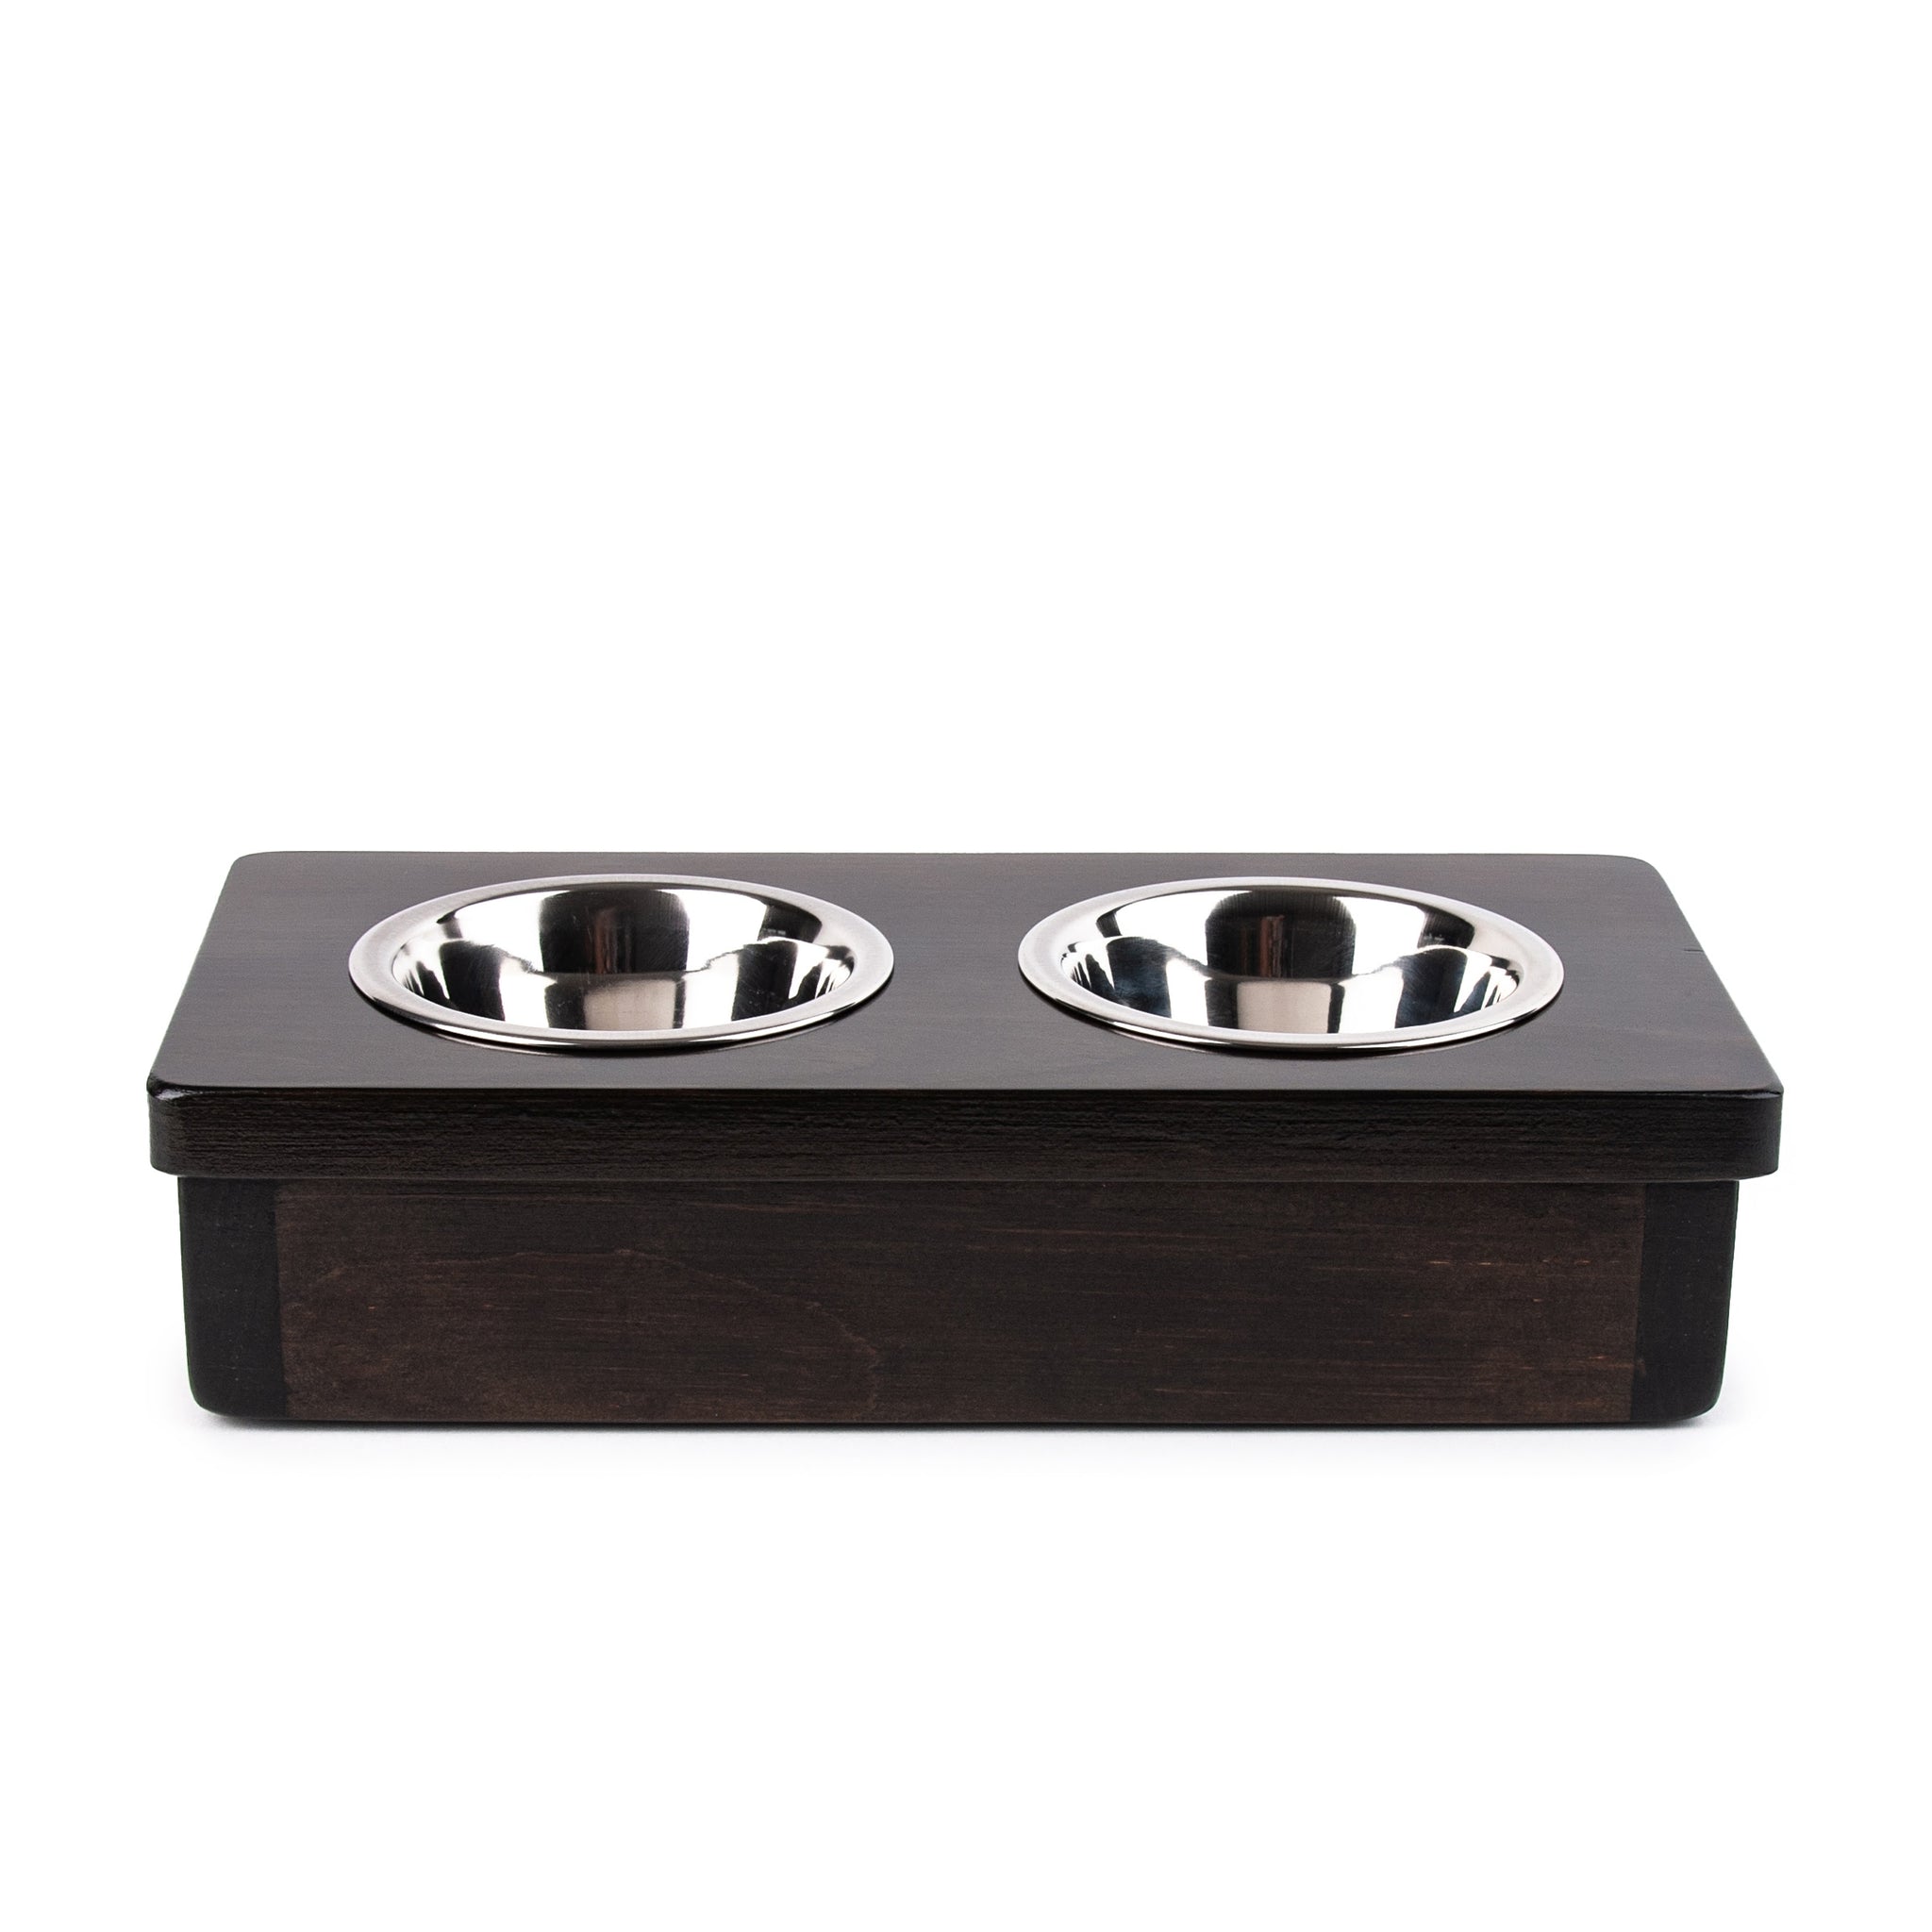 Ozarks Fehr Trade Originals Elevated Single Dog & Cat Bowl, Forest Trail, 12-Cup, 17-in Tall